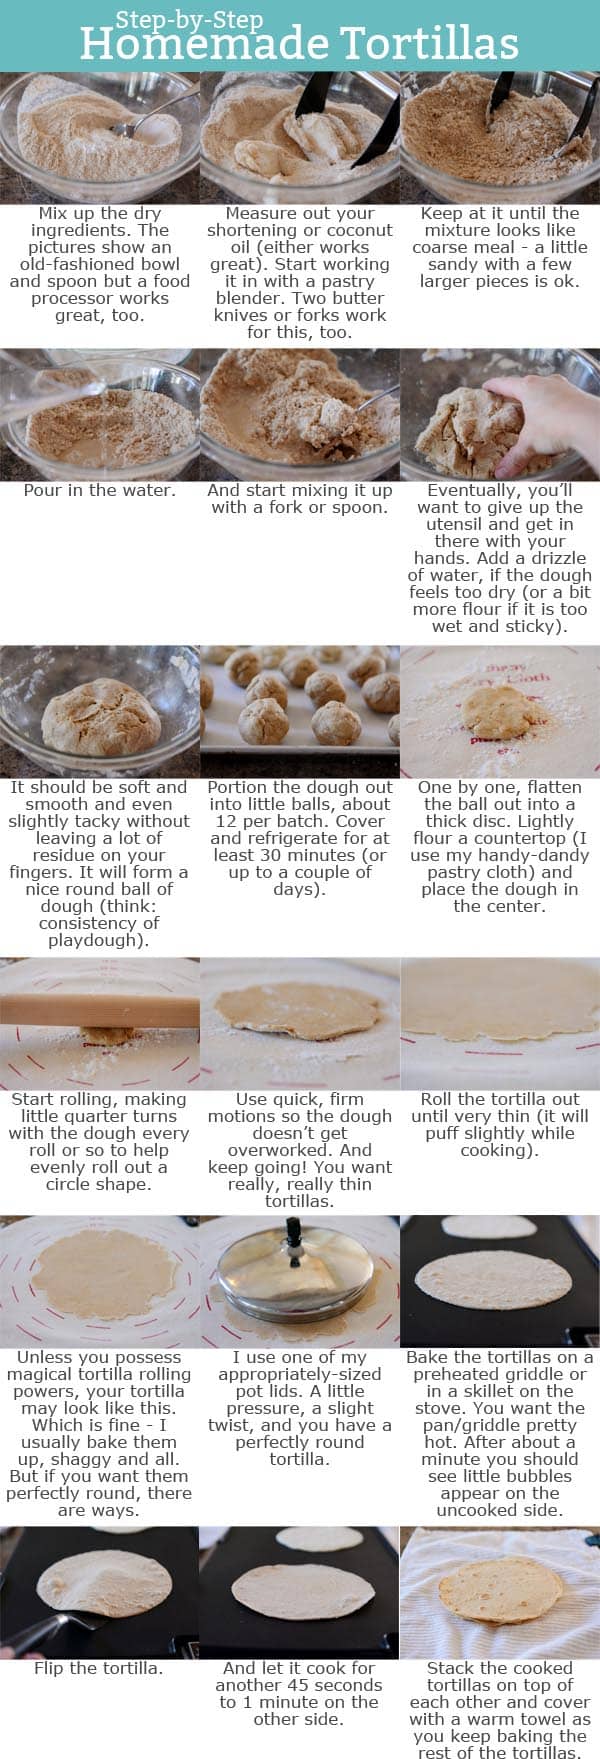 pictures and instructions showing how to make homemade tortillas